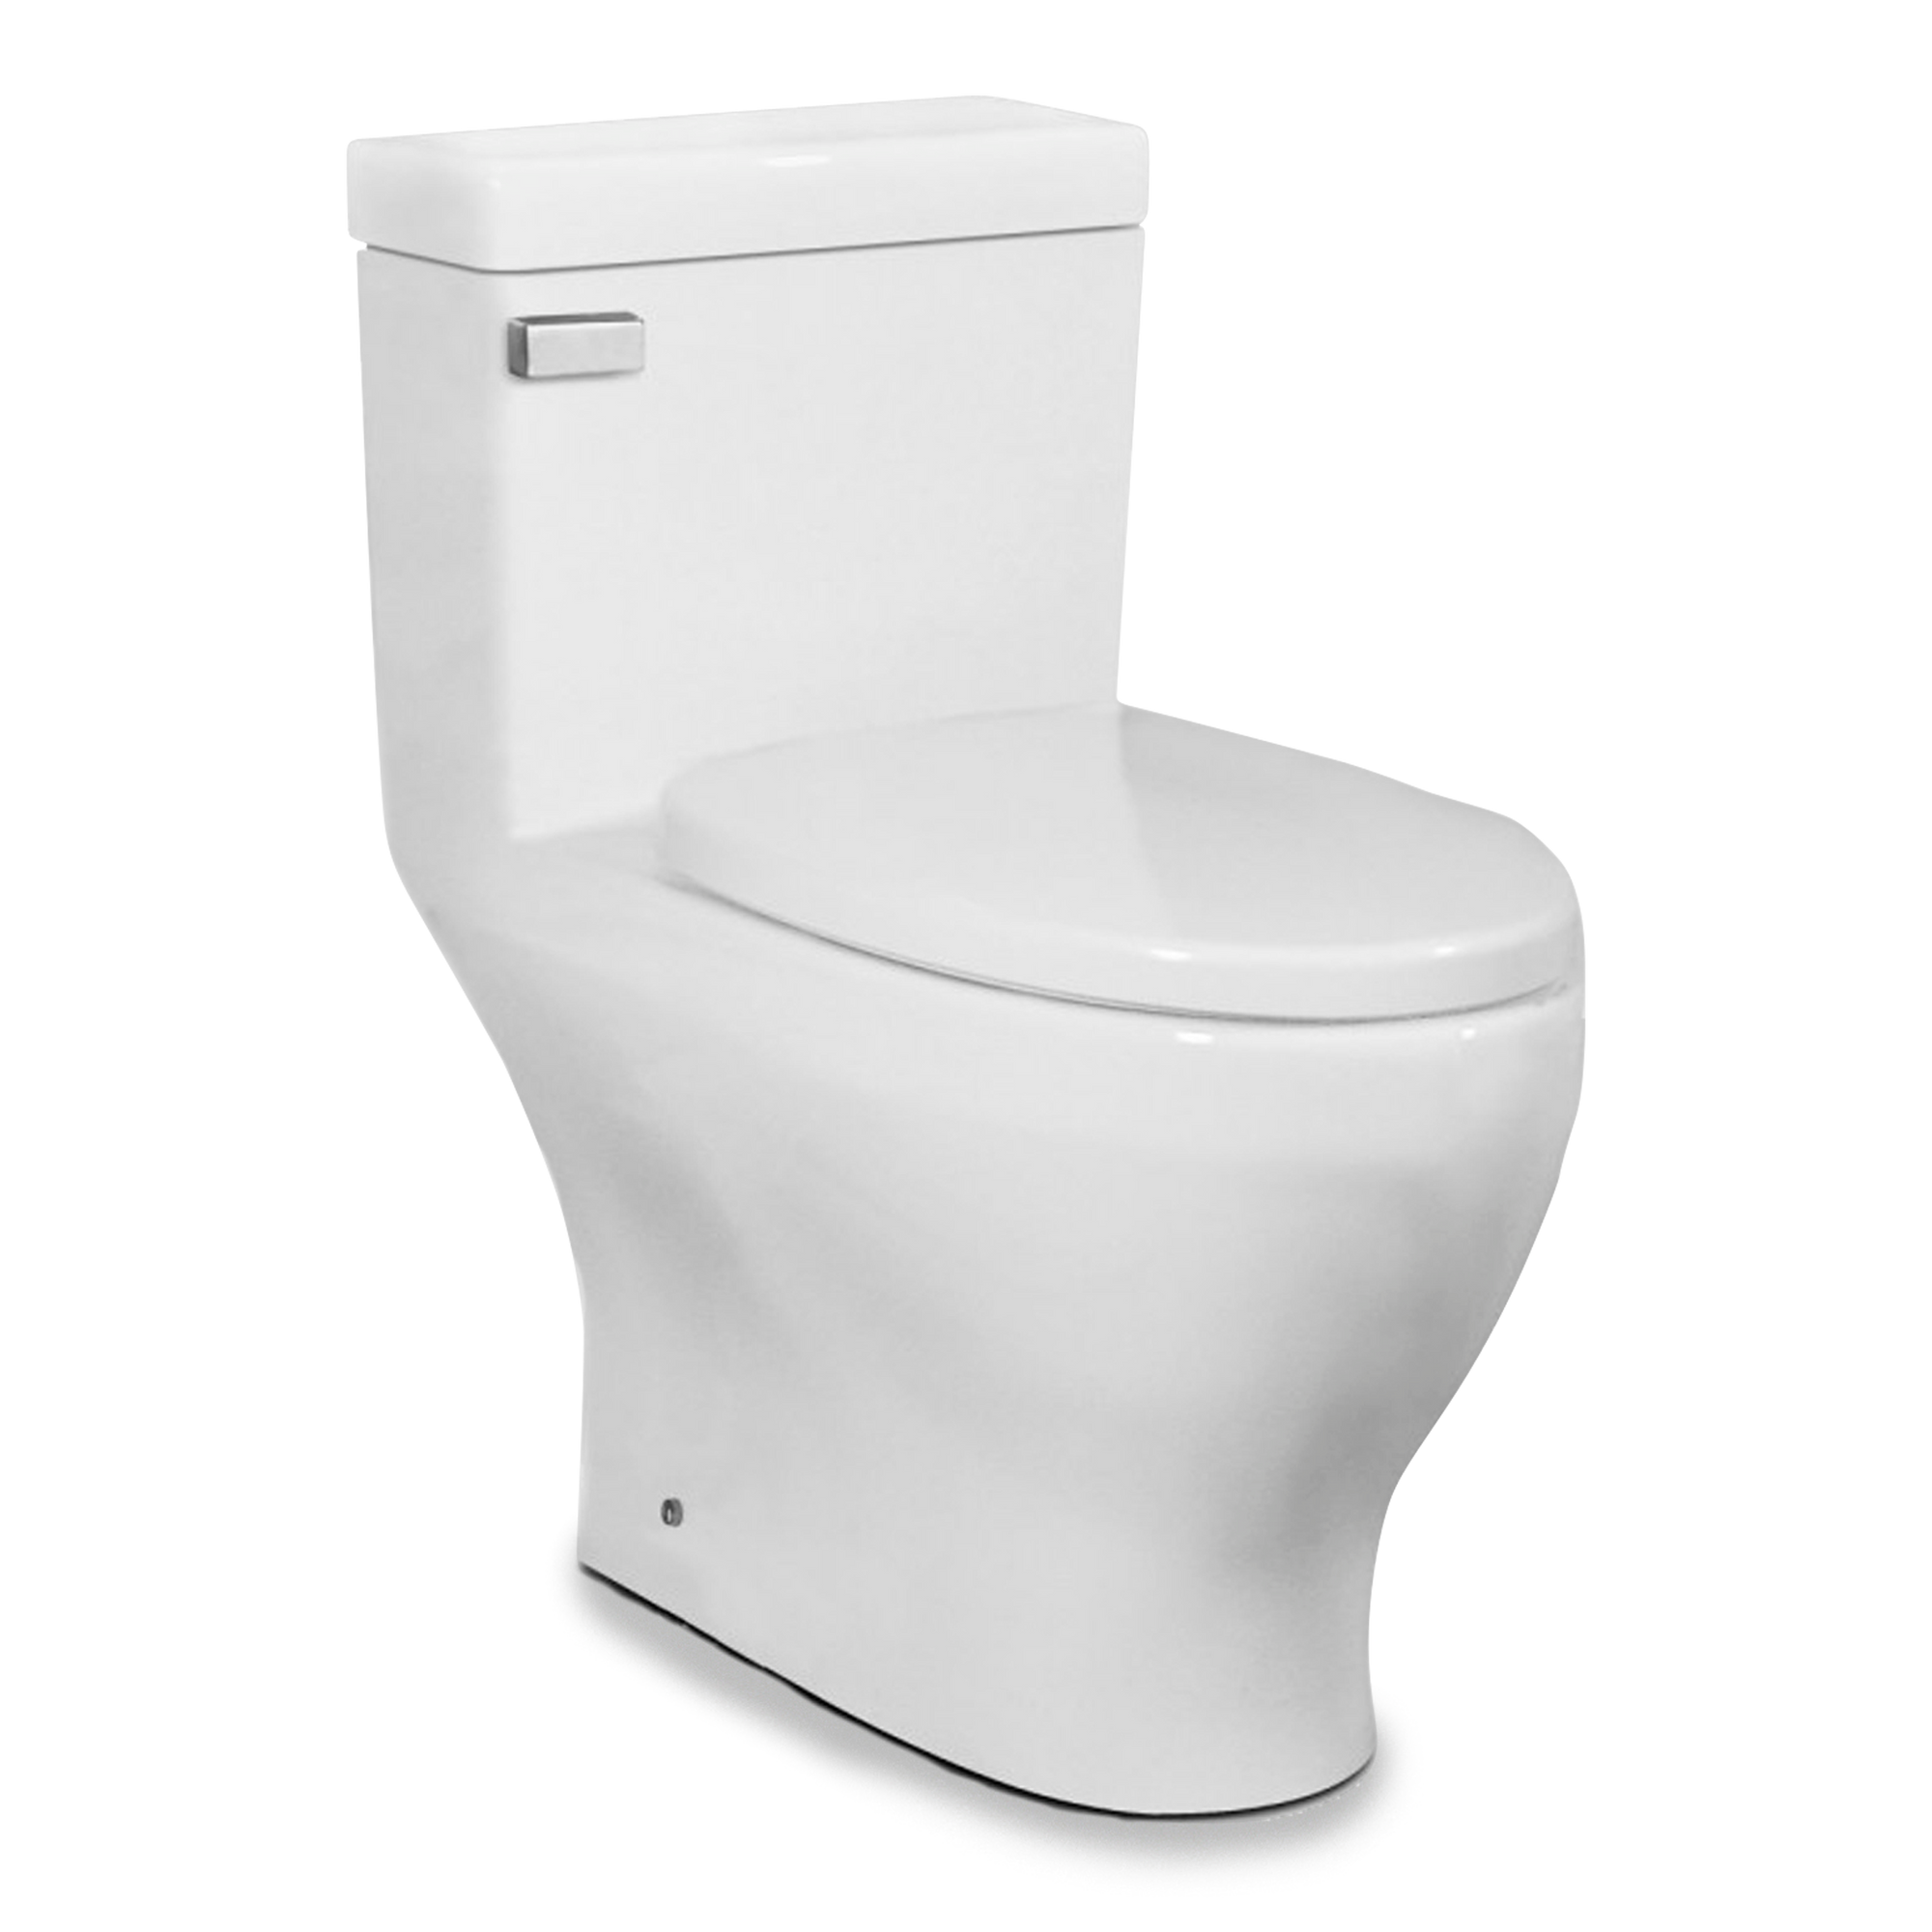 A transitional style one-piece toilet with Slow-Close seat.